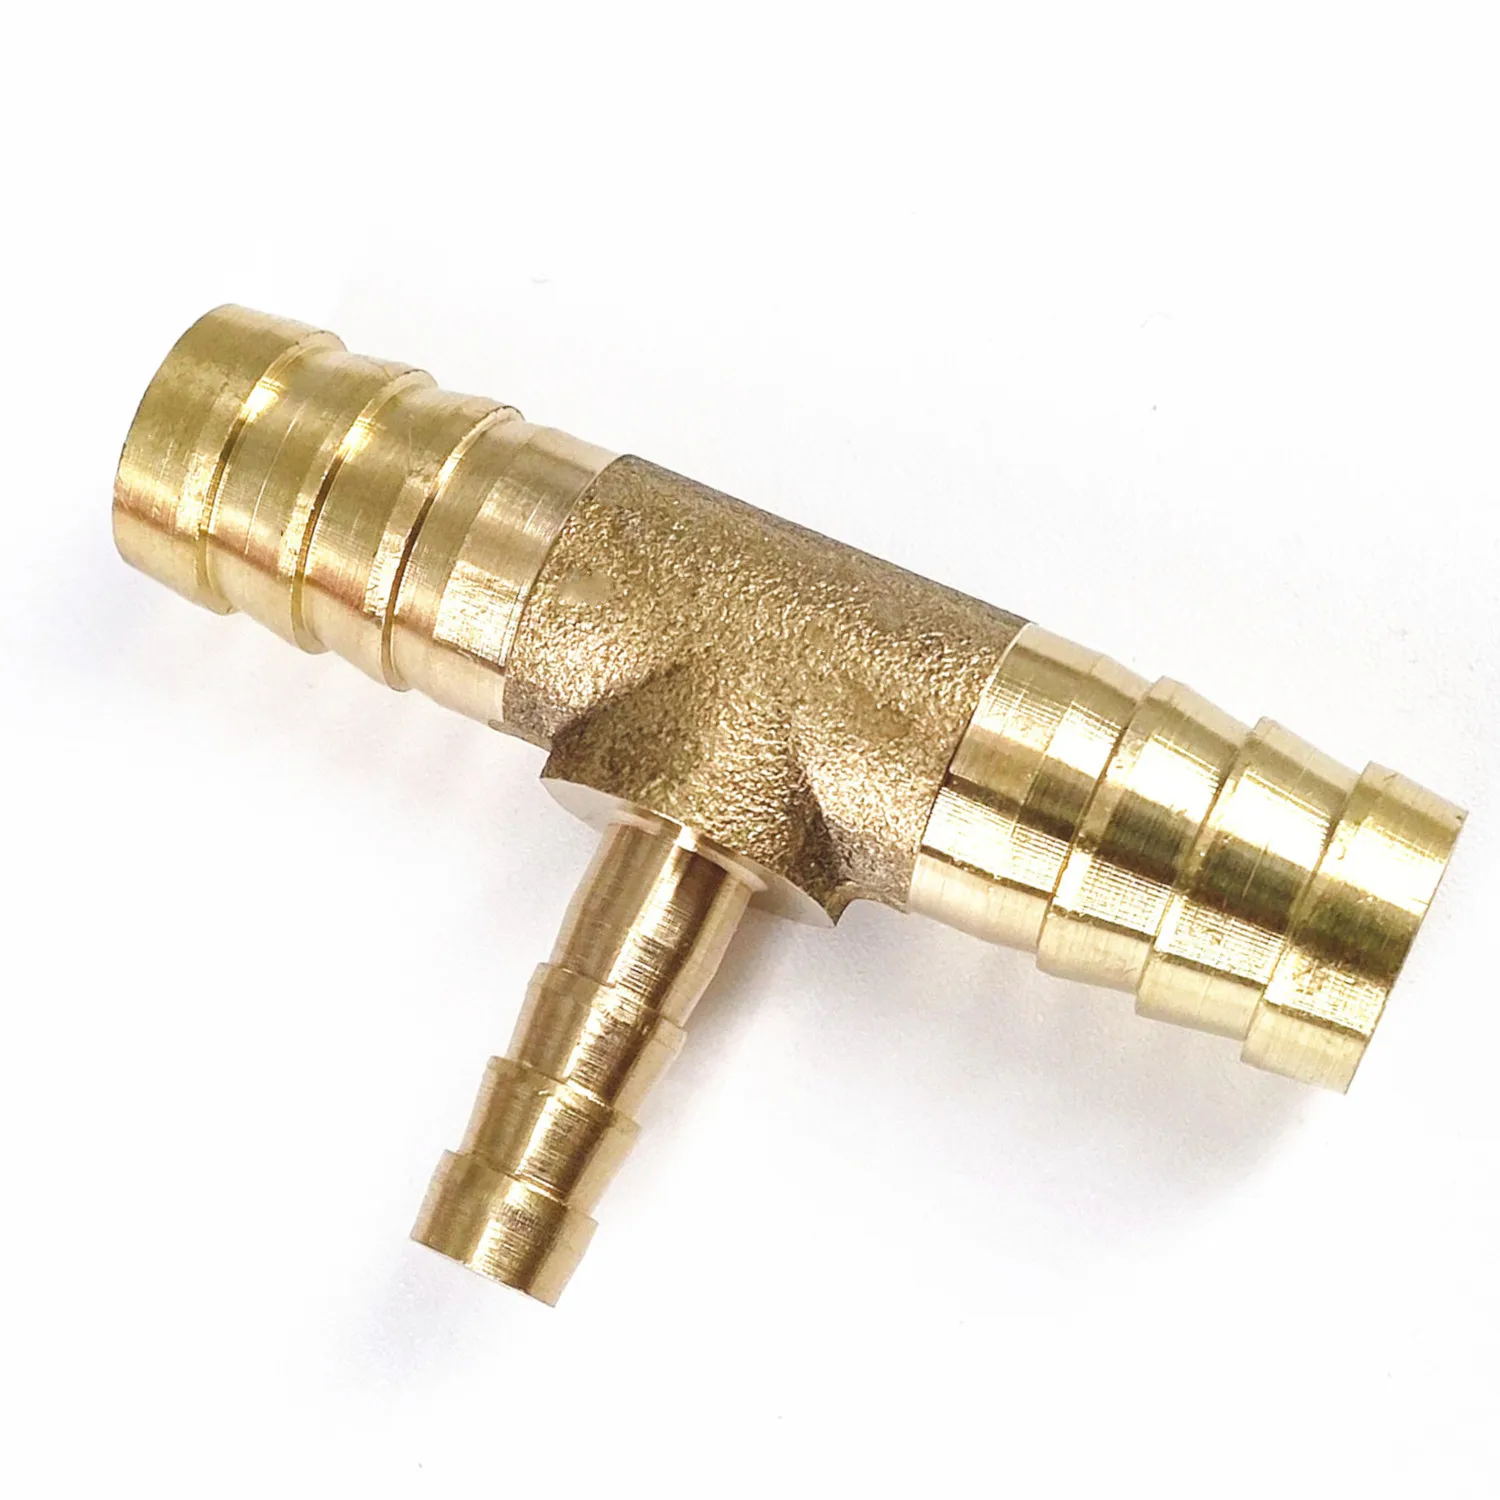 4 6 8 10 12 14 16 19mm Hose Barb OD Brass Reducer Pipe Fitting Tee 3 Way Splitter Connector